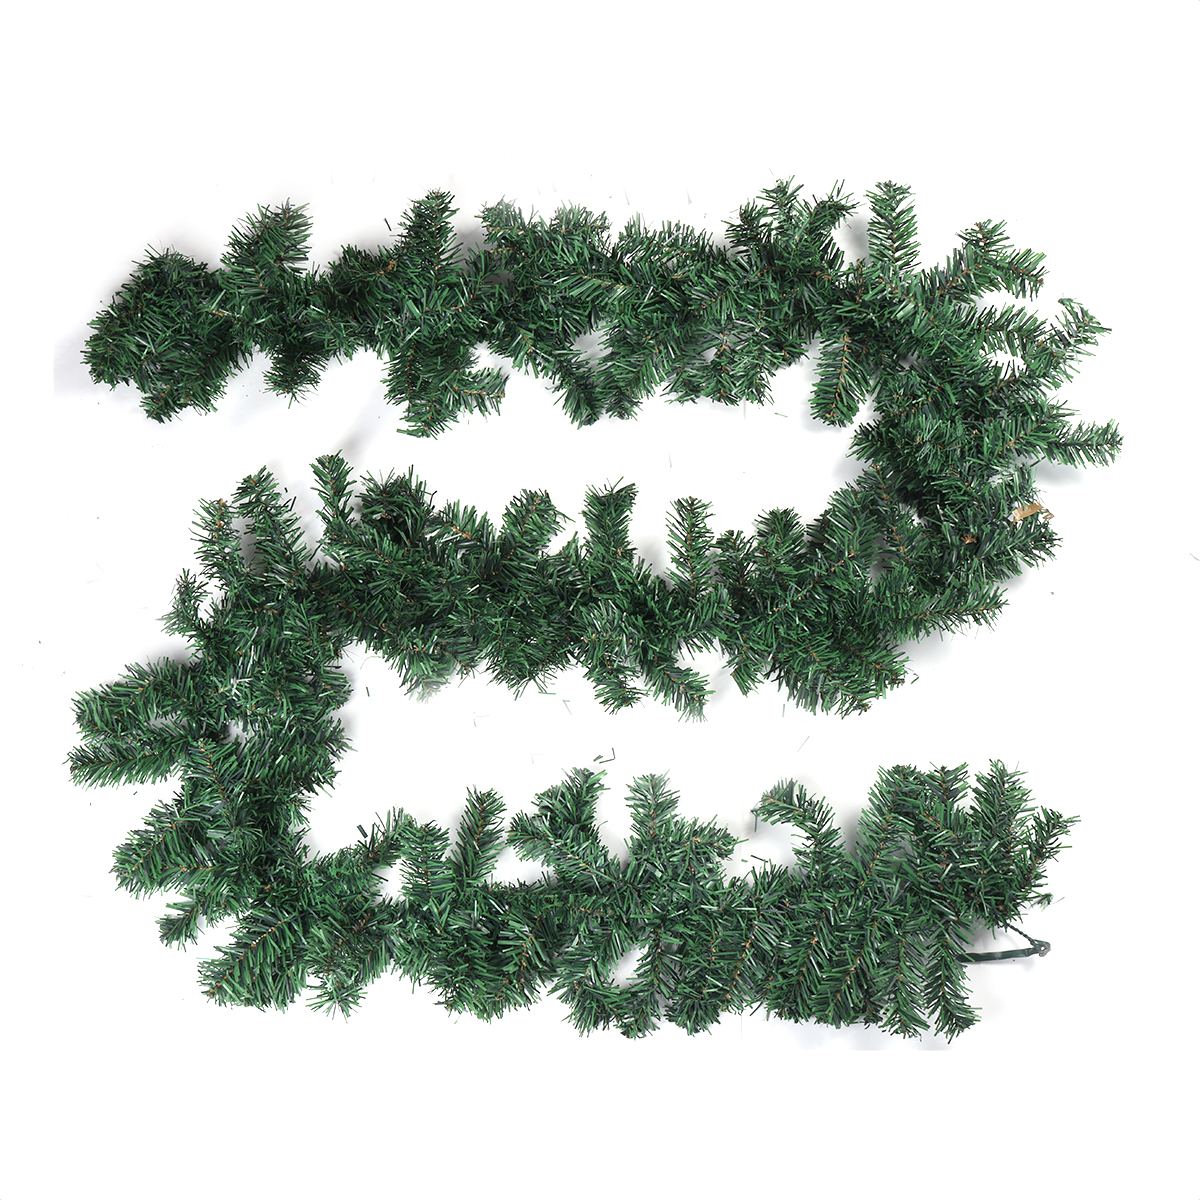 27m-Christmas-Garland-Colorful-Fireplaces-Stairs-LED-Decorated-Garlands-Decor-1821550-4